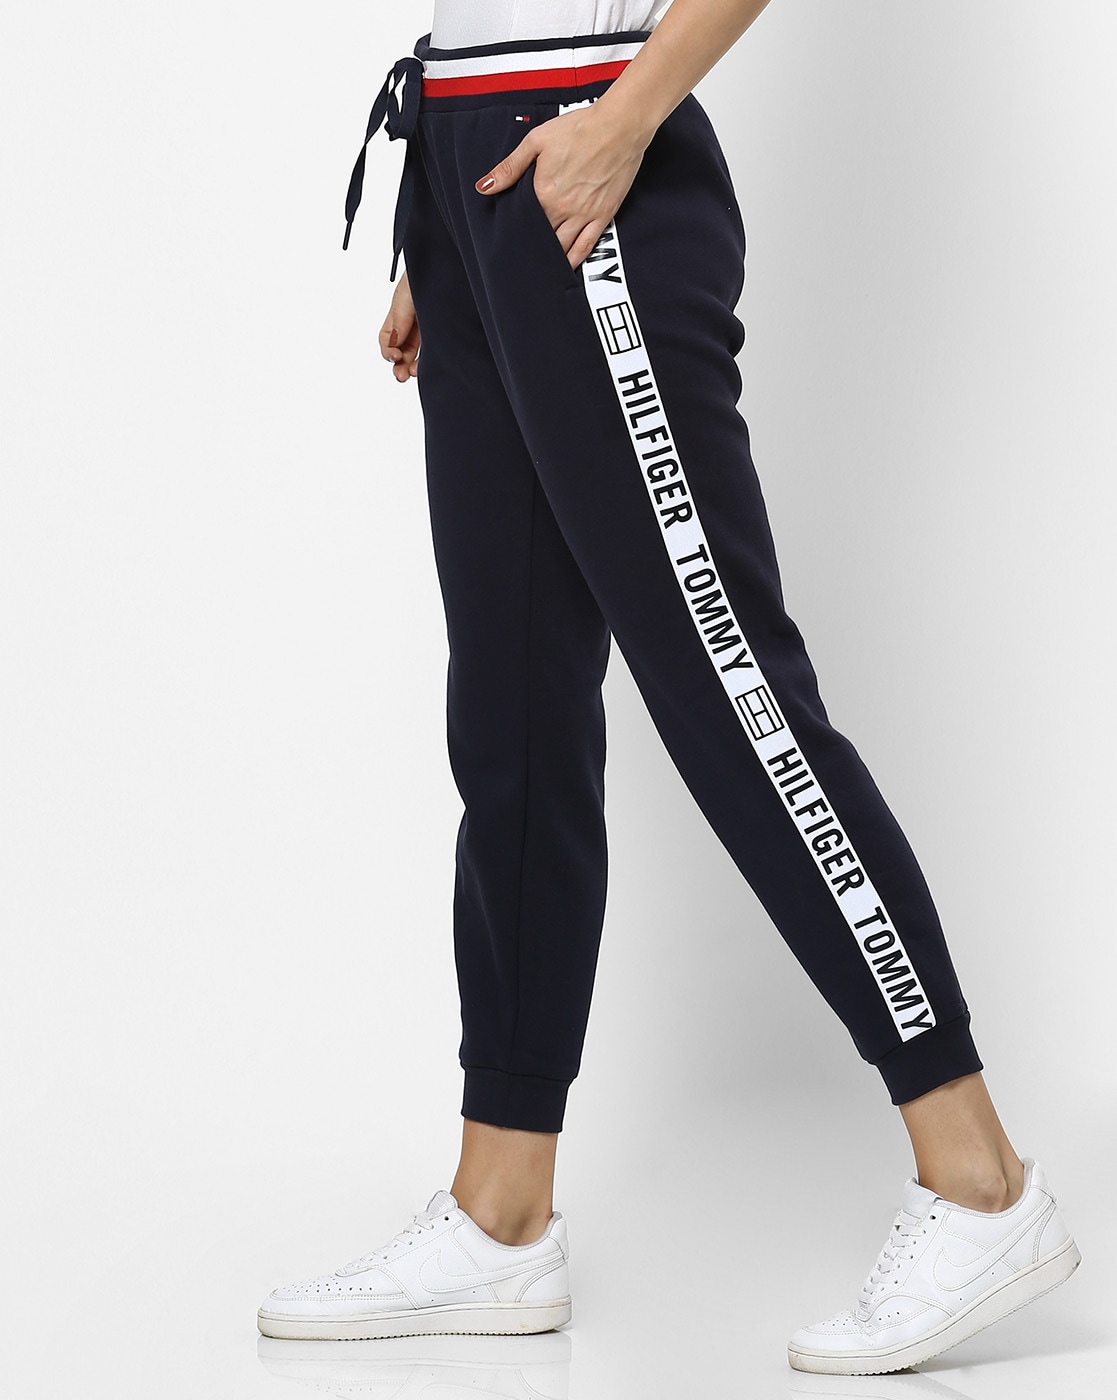 Buy Blue Track Pants for by TOMMY HILFIGER Ajio.com